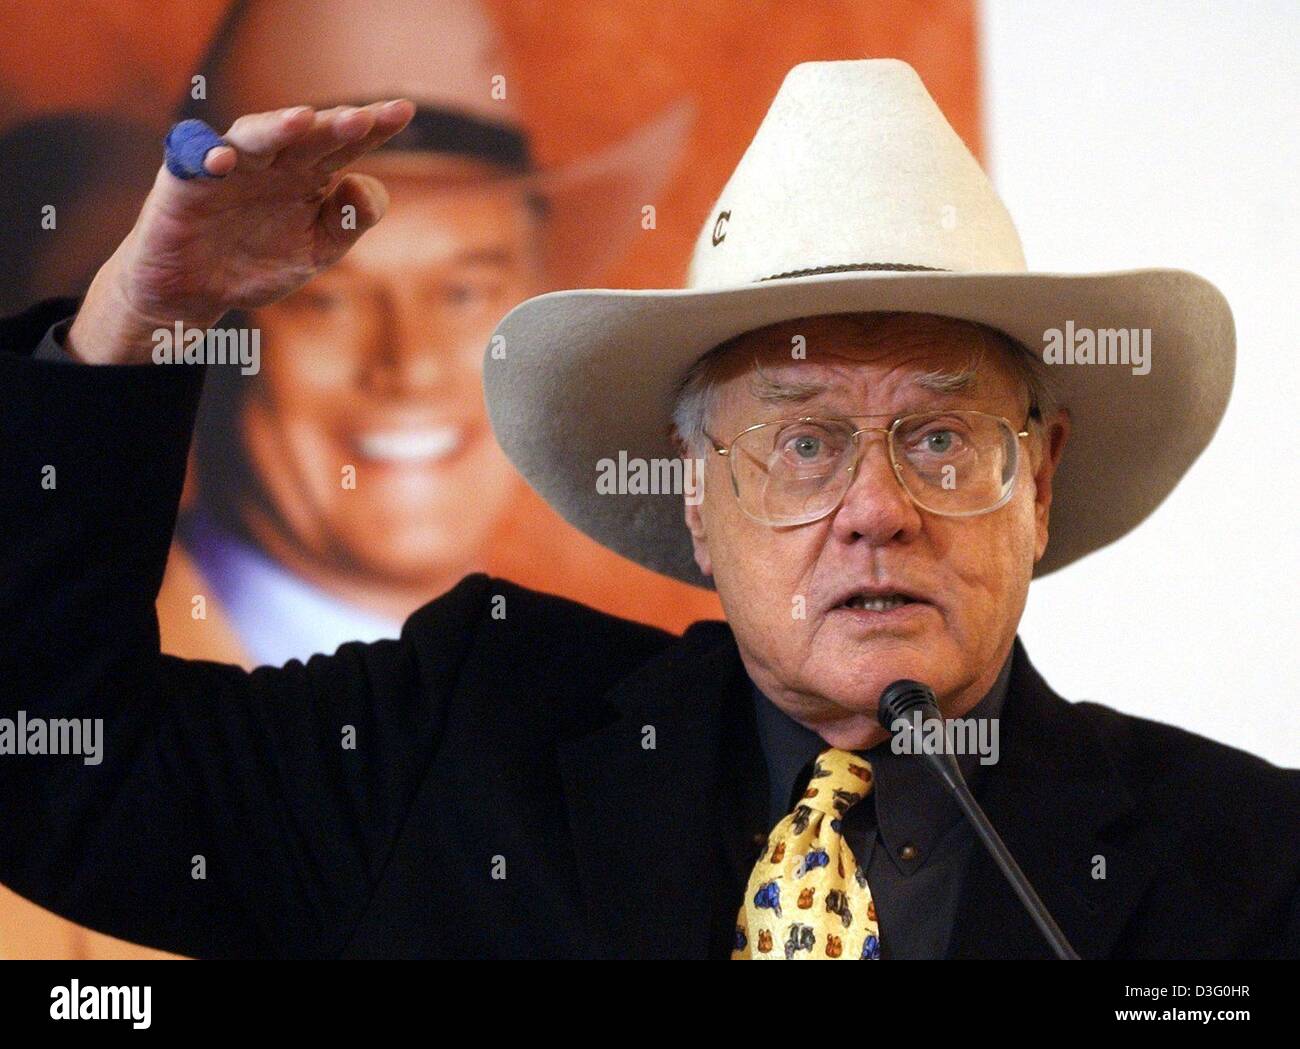 (dpa) - US actor Larry Hagman gestures with his right arm during a promotion for his newly published autobiography in Berlin, Germany, 19 February 2003.  The 71-year-old actor, world famous for his role as 'J. R. Ewing' on the now cult television series 'Dallas', openly addresses his drug and alcohol problems in his book. Stock Photo